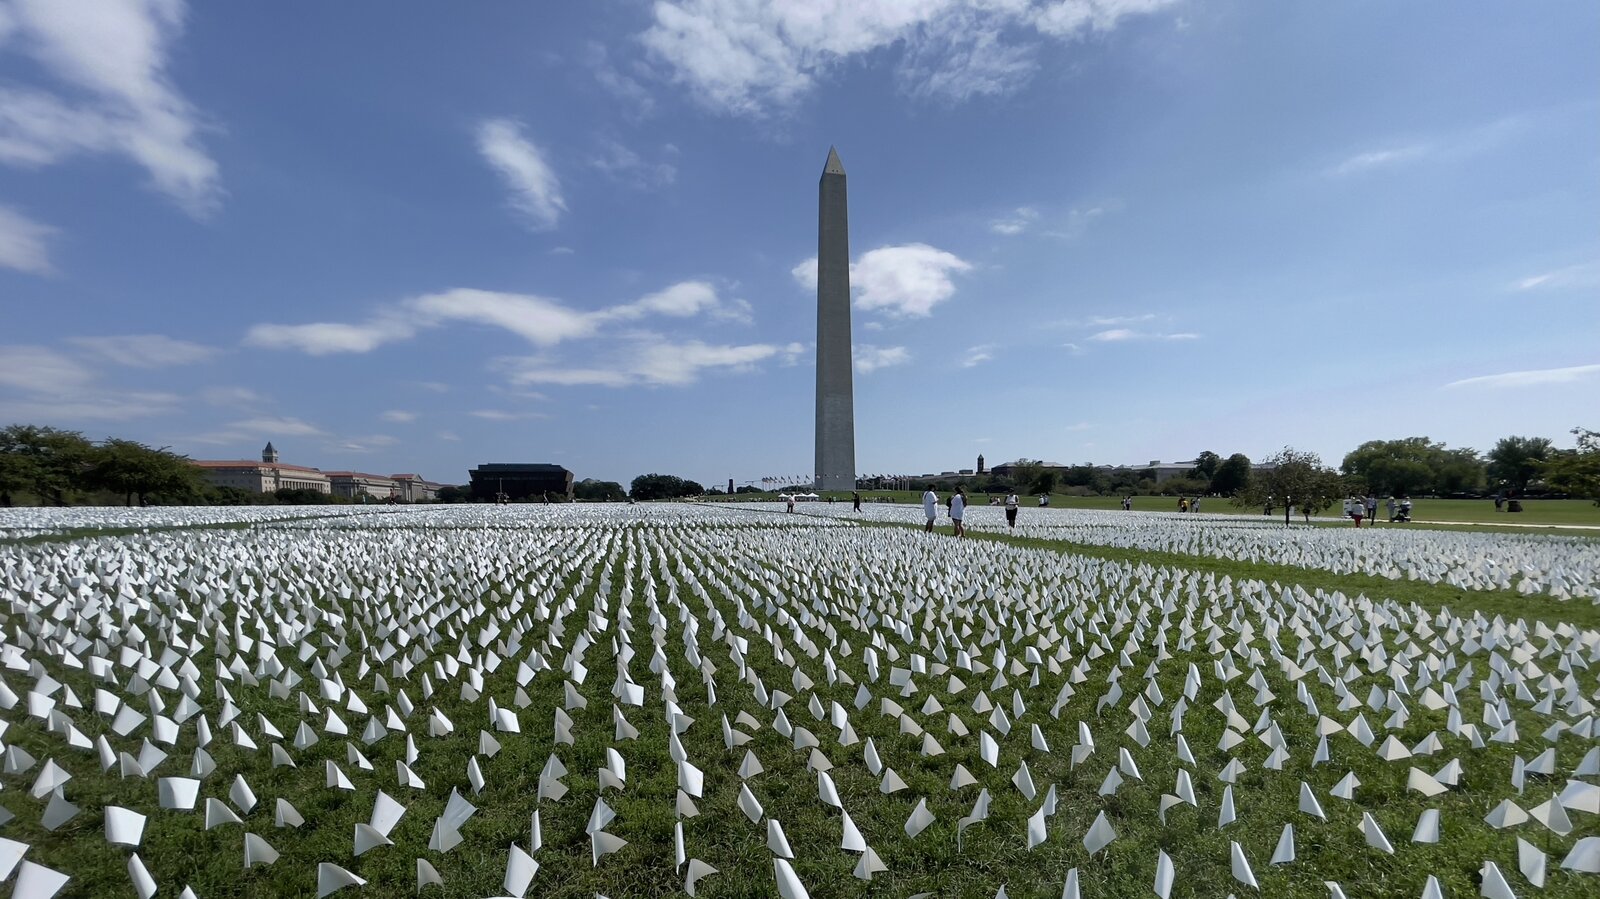 TOPSHOT - White flags are seen on the National Mall near the Washington Monument in Washington, DC on September 19, 2021. - The project, by artist Suzanne Brennan Firstenberg, uses over 600,000 miniature white flags to symbolize the lives lost to Covid-19 in the US. (Photo by Daniel SLIM / AFP)